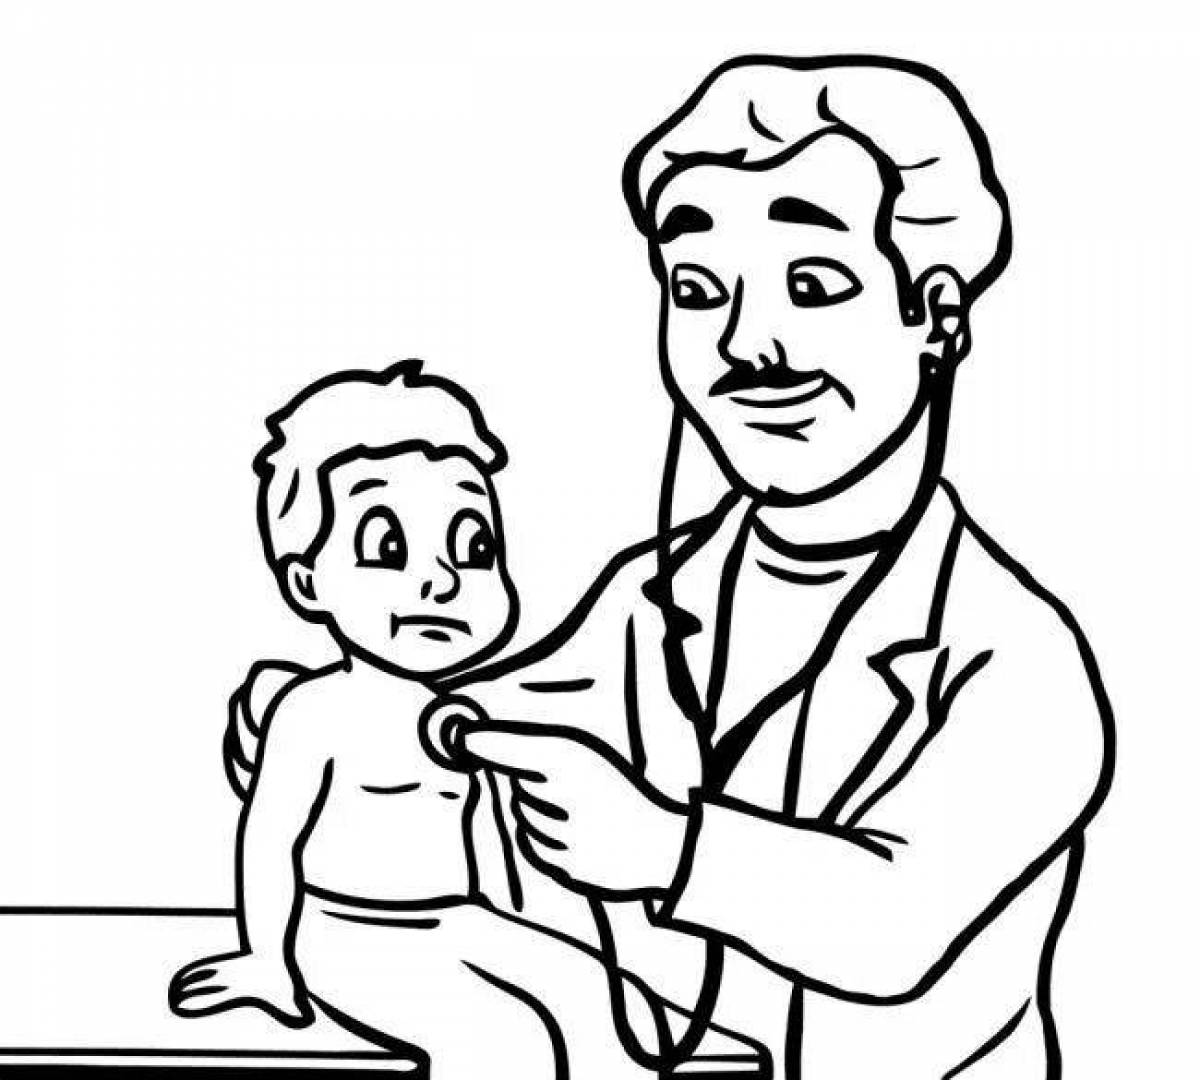 Fancy doctor figurine coloring page